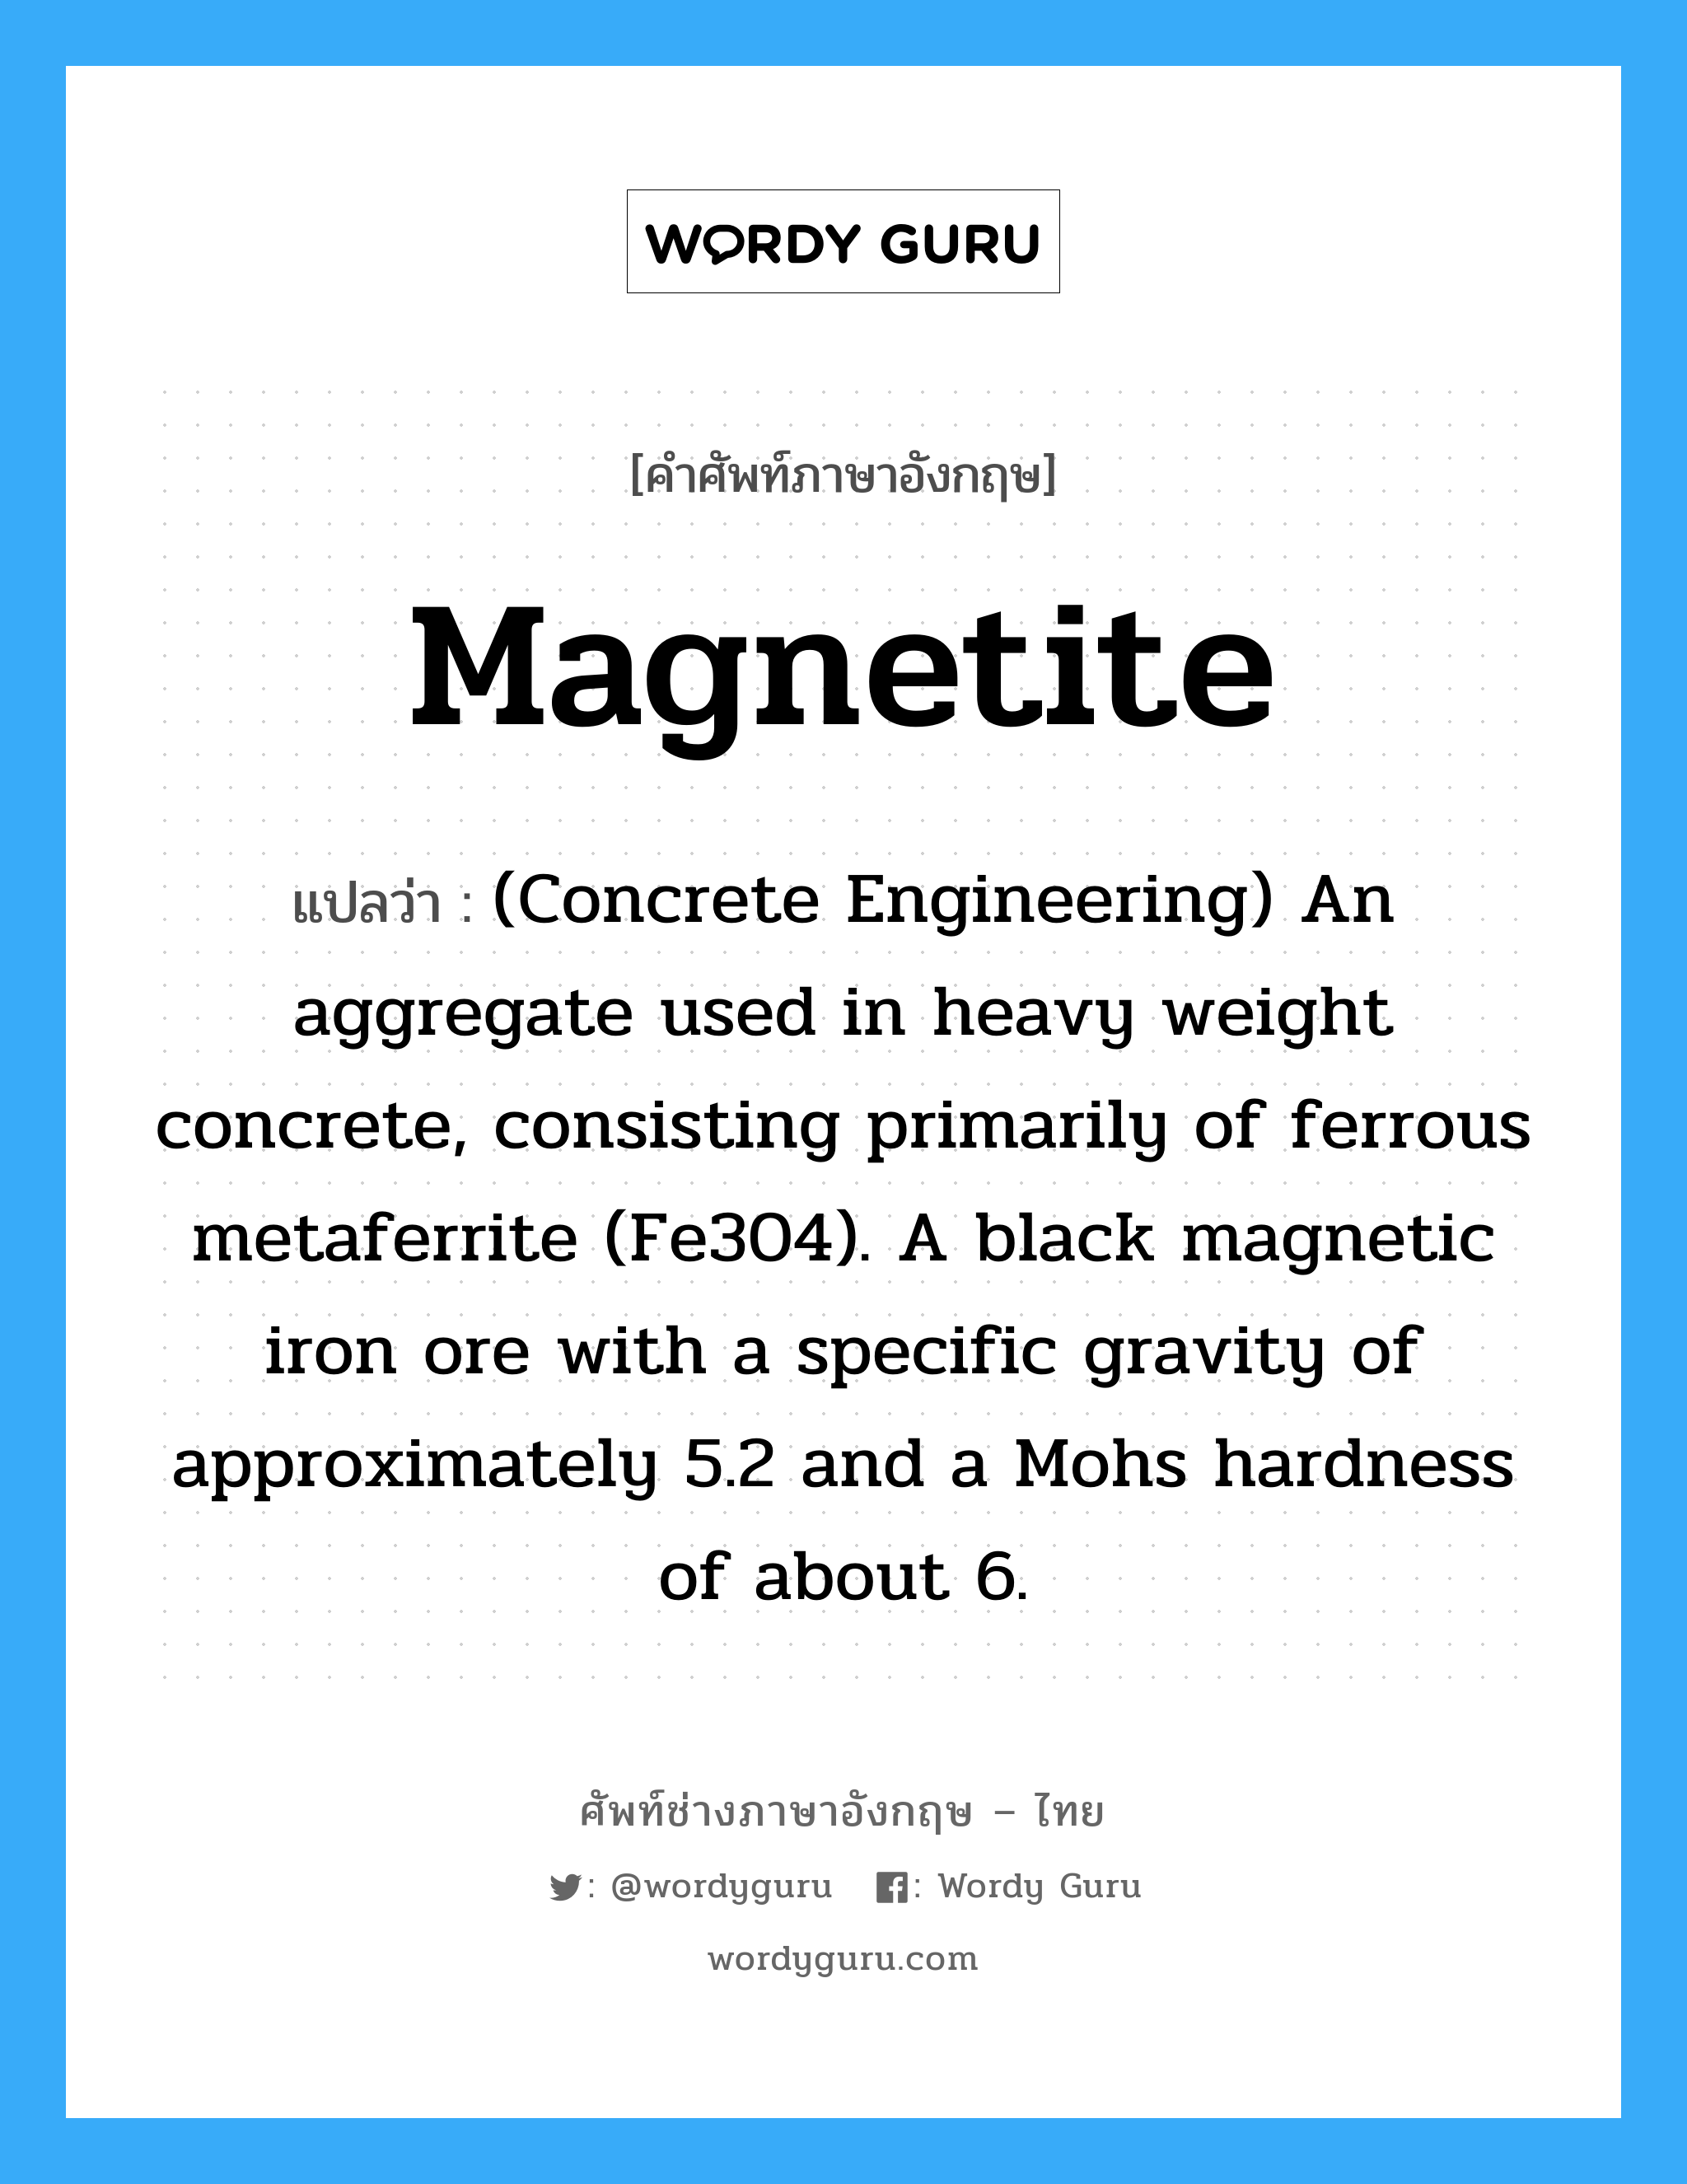 (Concrete Engineering) An aggregate used in heavy weight concrete, consisting primarily of ferrous metaferrite (Fe304). A black magnetic iron ore with a specific gravity of approximately 5.2 and a Mohs hardness of about 6. ภาษาอังกฤษ?, คำศัพท์ช่างภาษาอังกฤษ - ไทย (Concrete Engineering) An aggregate used in heavy weight concrete, consisting primarily of ferrous metaferrite (Fe304). A black magnetic iron ore with a specific gravity of approximately 5.2 and a Mohs hardness of about 6. คำศัพท์ภาษาอังกฤษ (Concrete Engineering) An aggregate used in heavy weight concrete, consisting primarily of ferrous metaferrite (Fe304). A black magnetic iron ore with a specific gravity of approximately 5.2 and a Mohs hardness of about 6. แปลว่า Magnetite